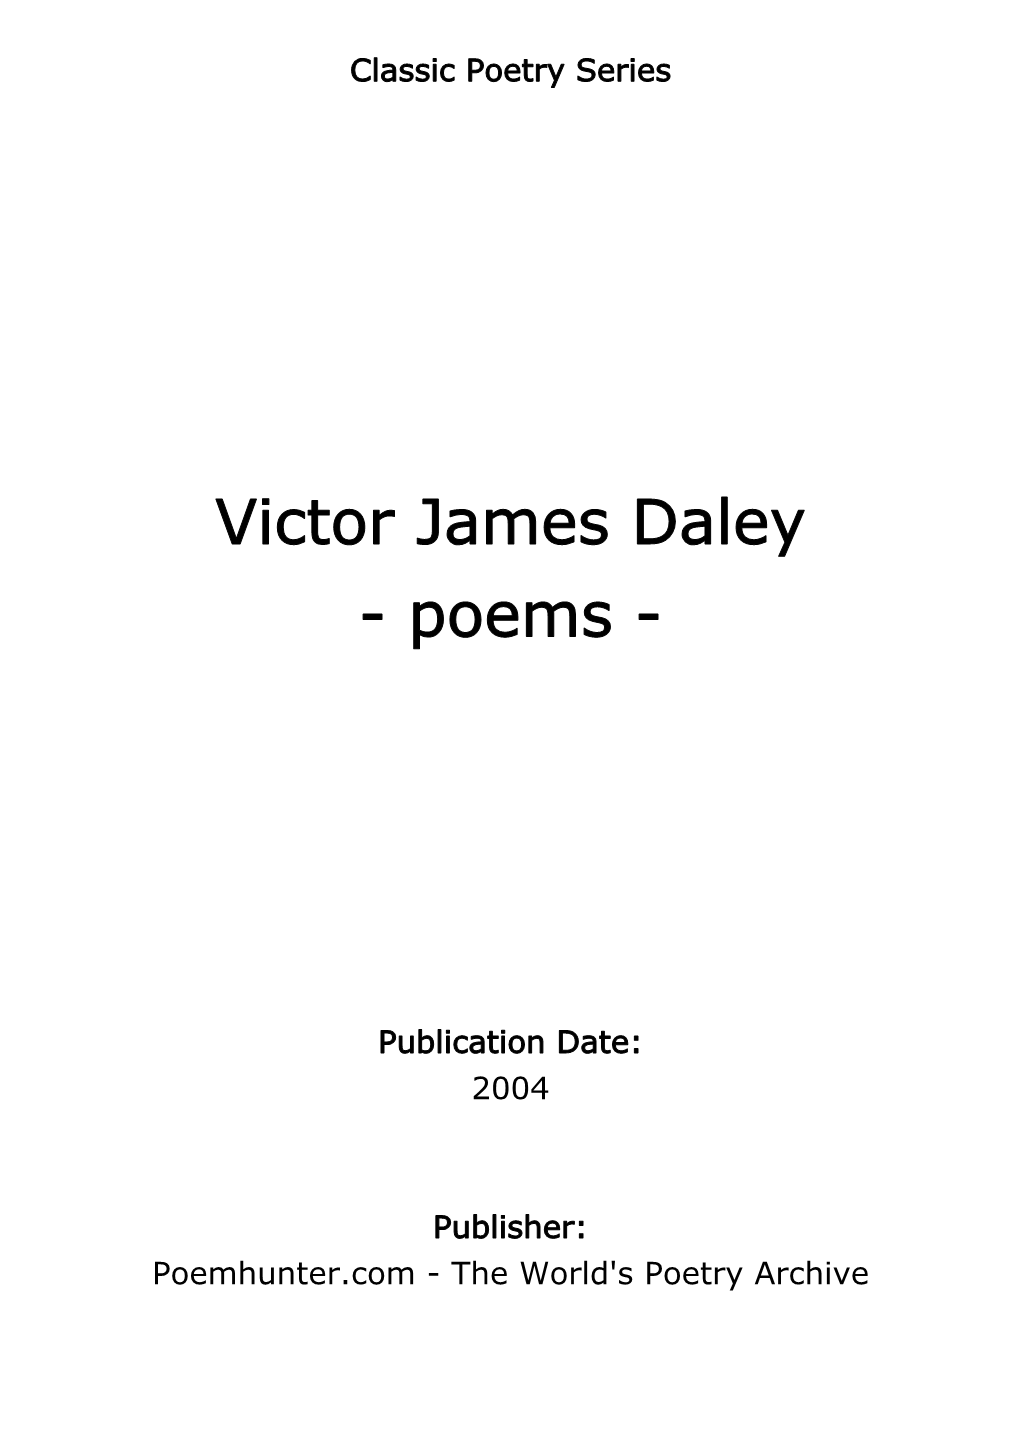 Victor James Daley - Poems